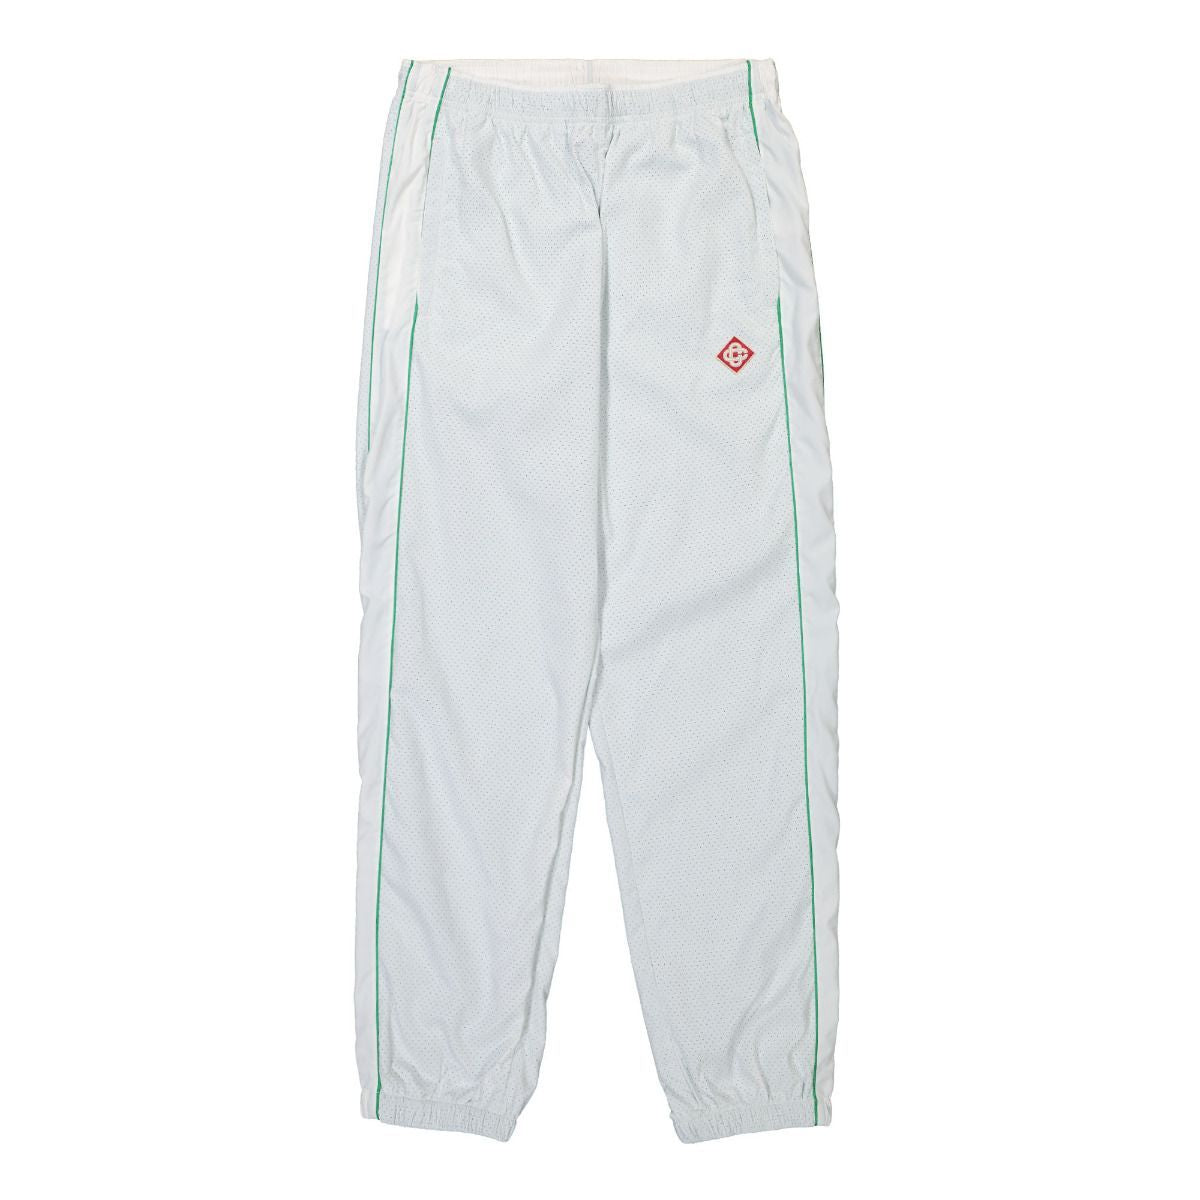 WHITEGREEN CASABLANCA PERFORATED LAYERED TRACK PANT